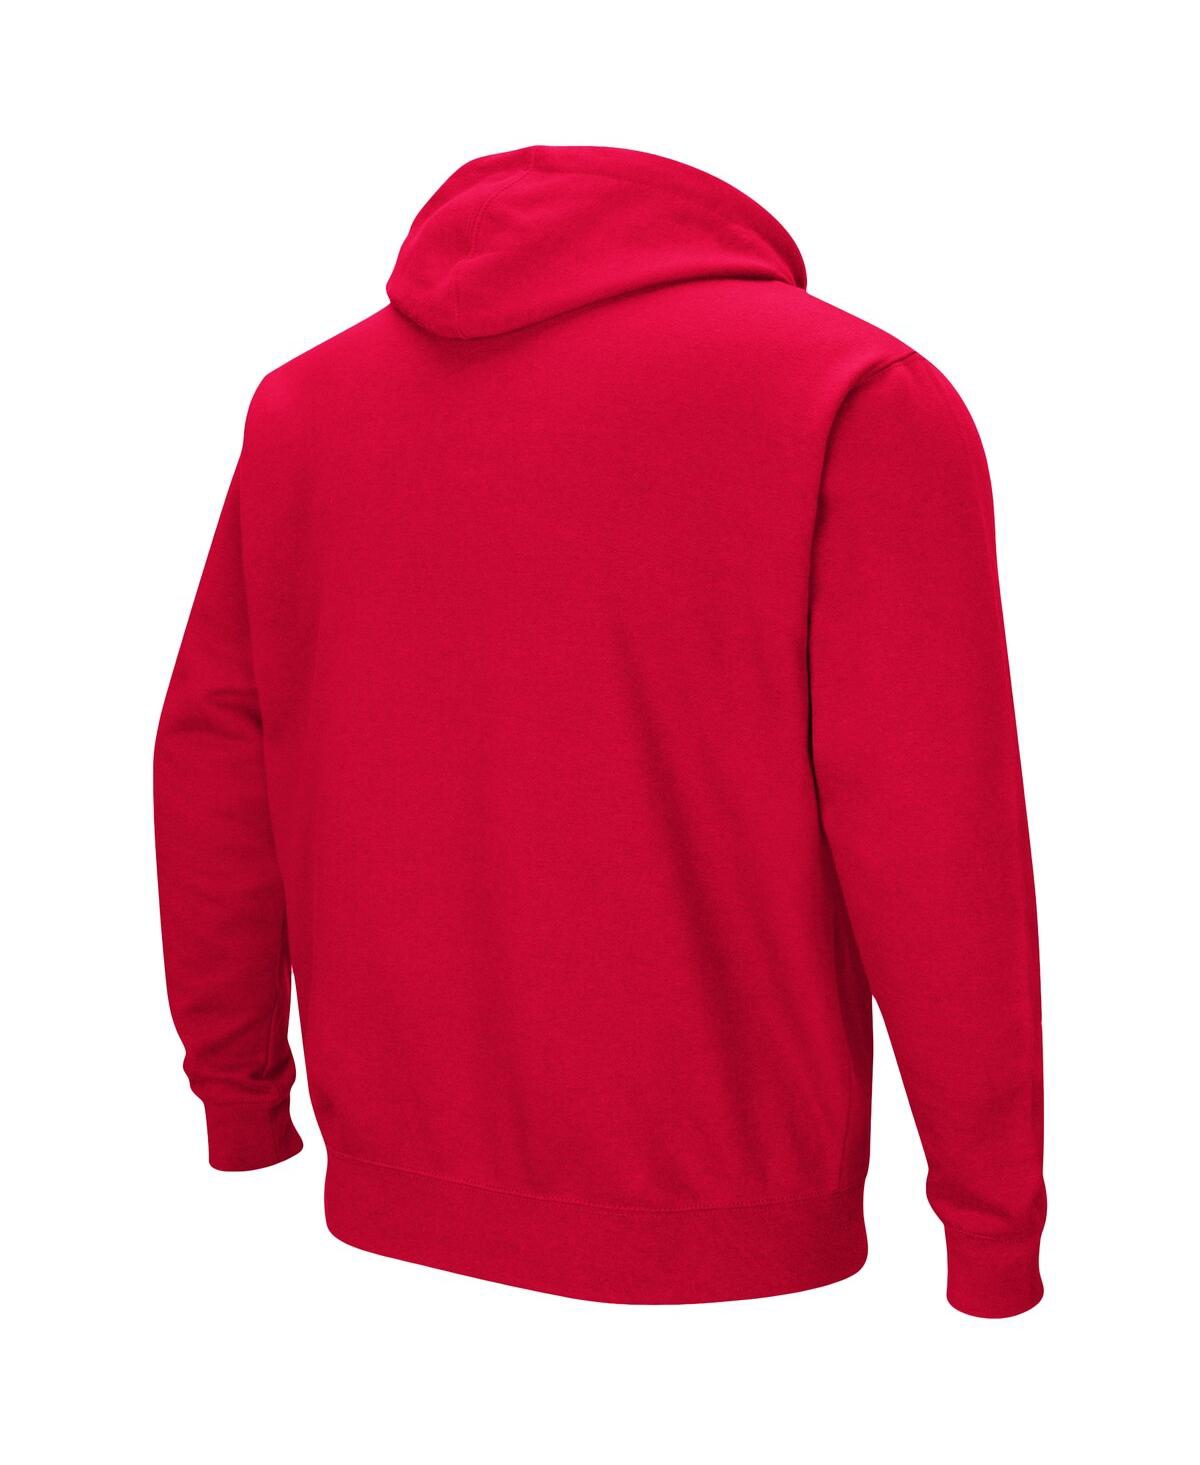 Shop Colosseum Men's  Red South Dakota Coyotes Arch And Logo Pullover Hoodie